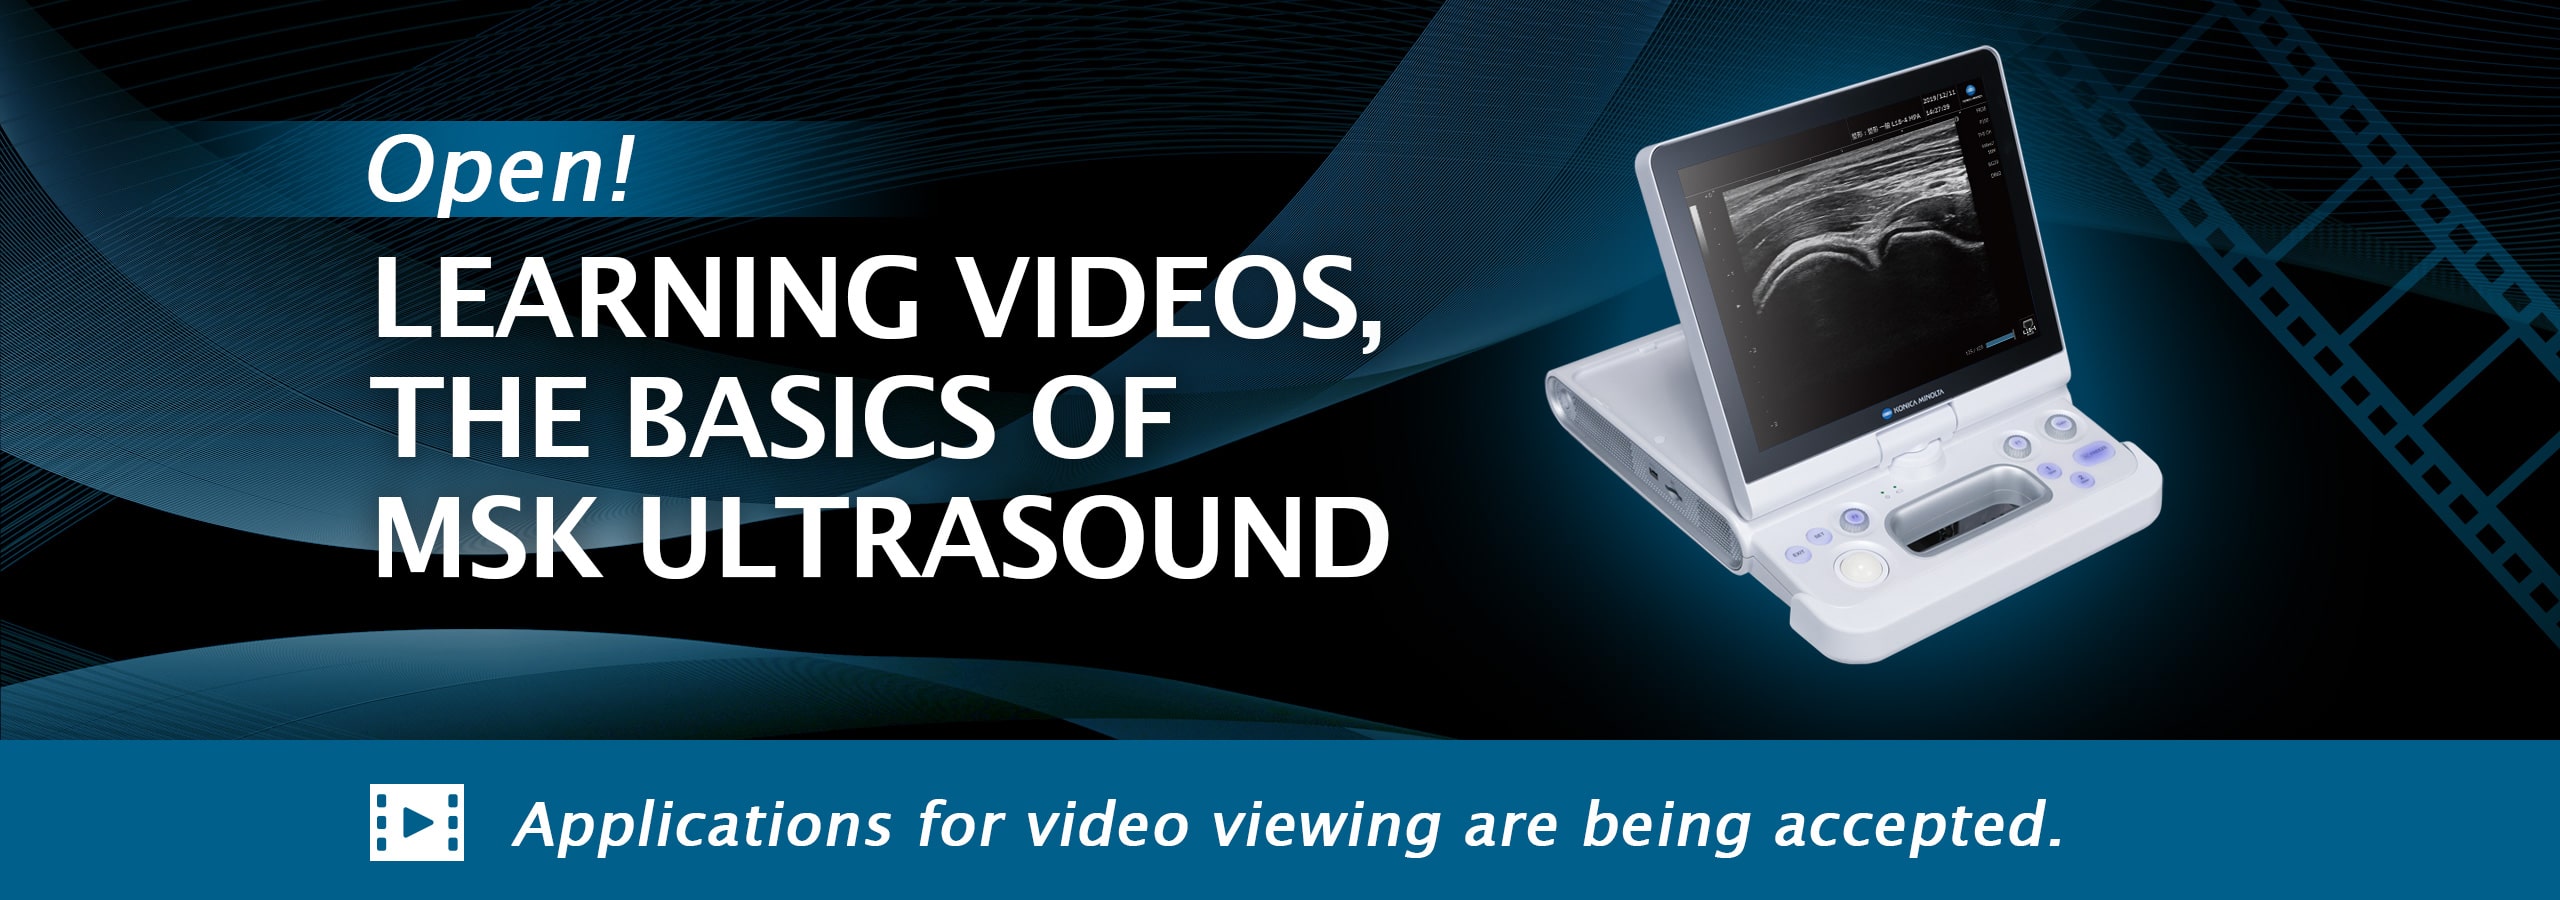 Open! LEARNING VIDEOS, THE BASICS OF MSK ULTRASOUND - Applications for video viewing are being accepted.